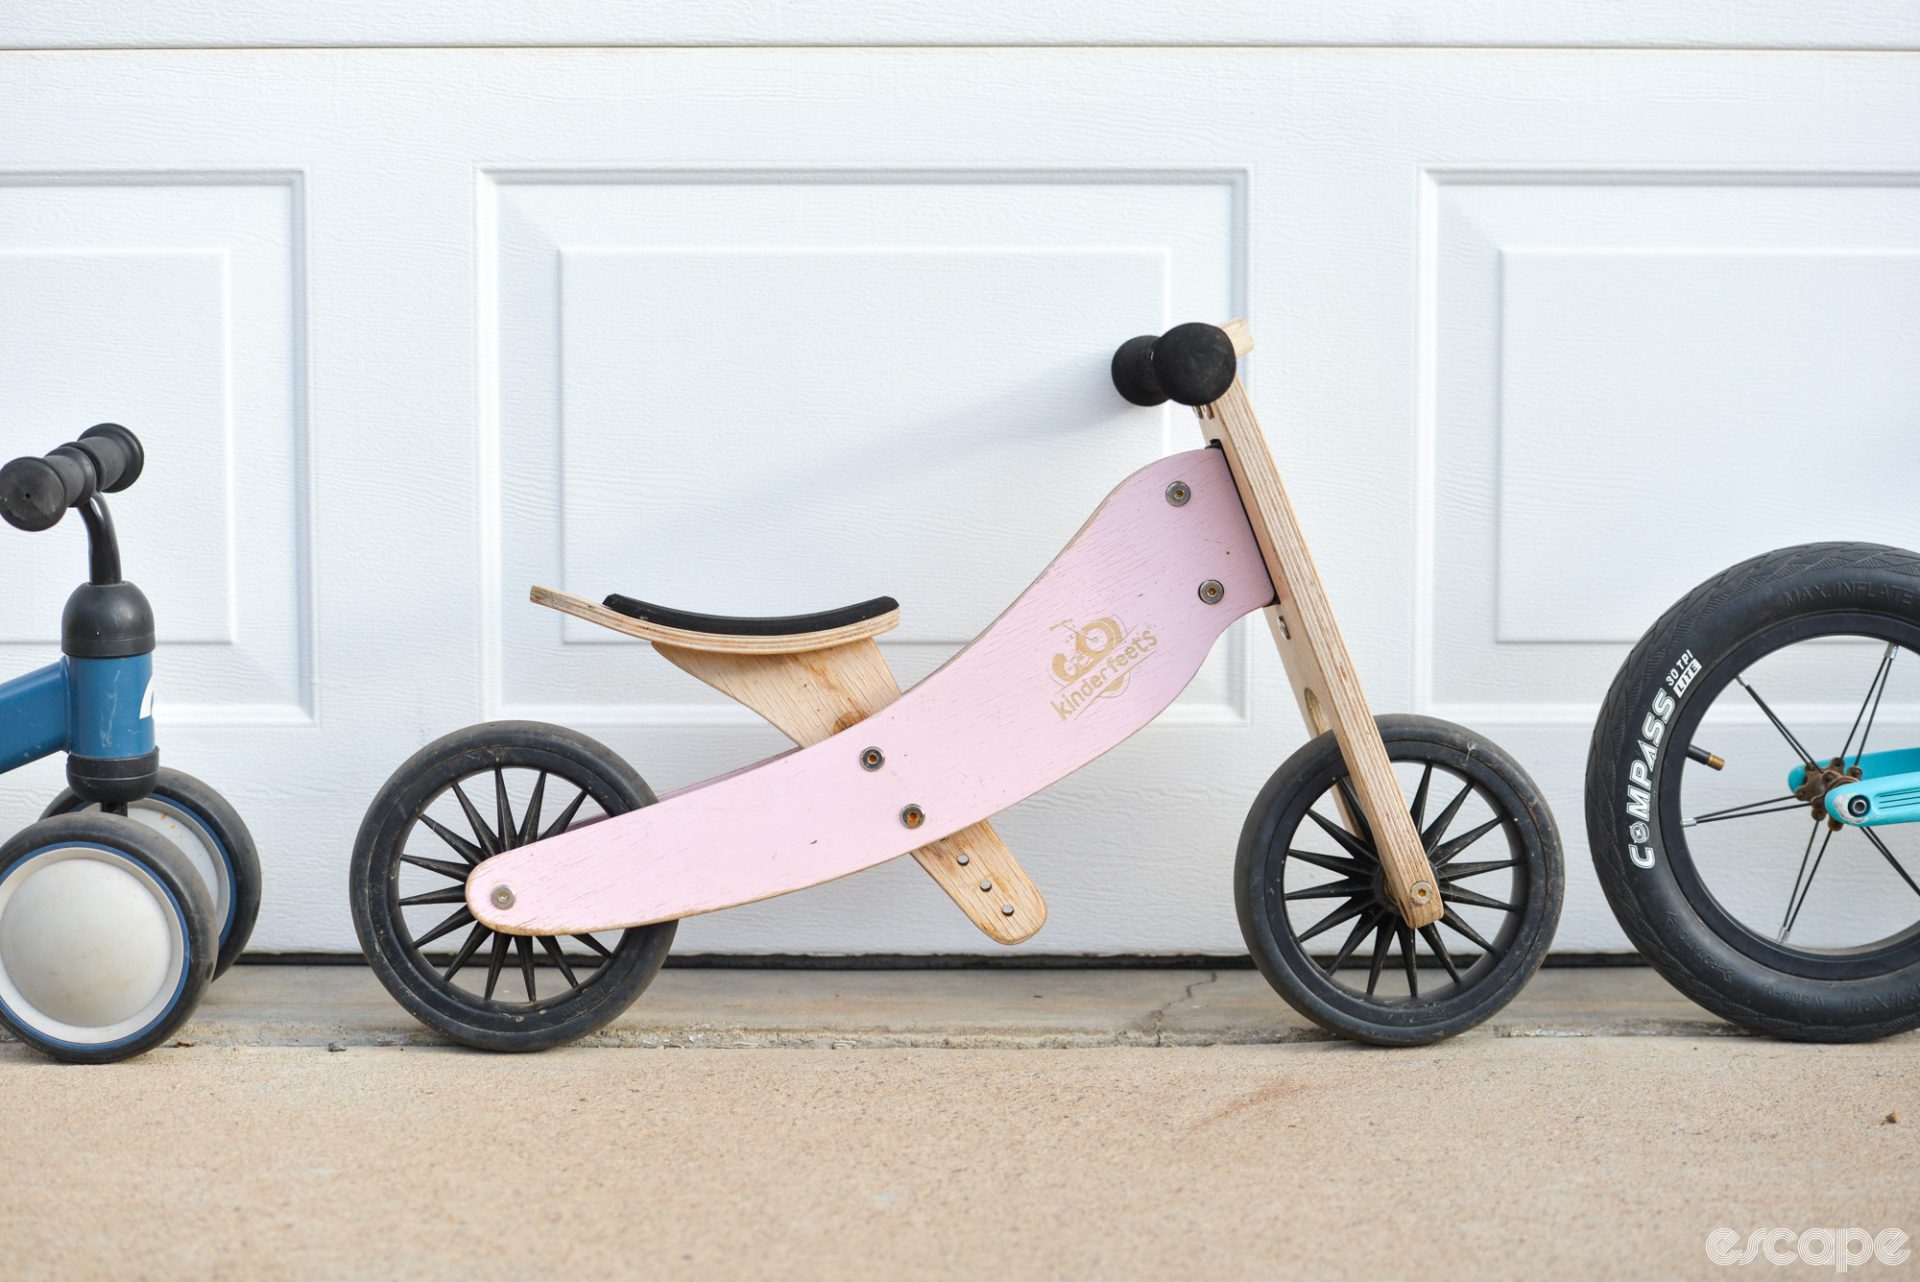 The Kinderfeets 2-in-1 from the side, which shows its laminated wood construction and simple, three-piece frame with a seat that goes very low.